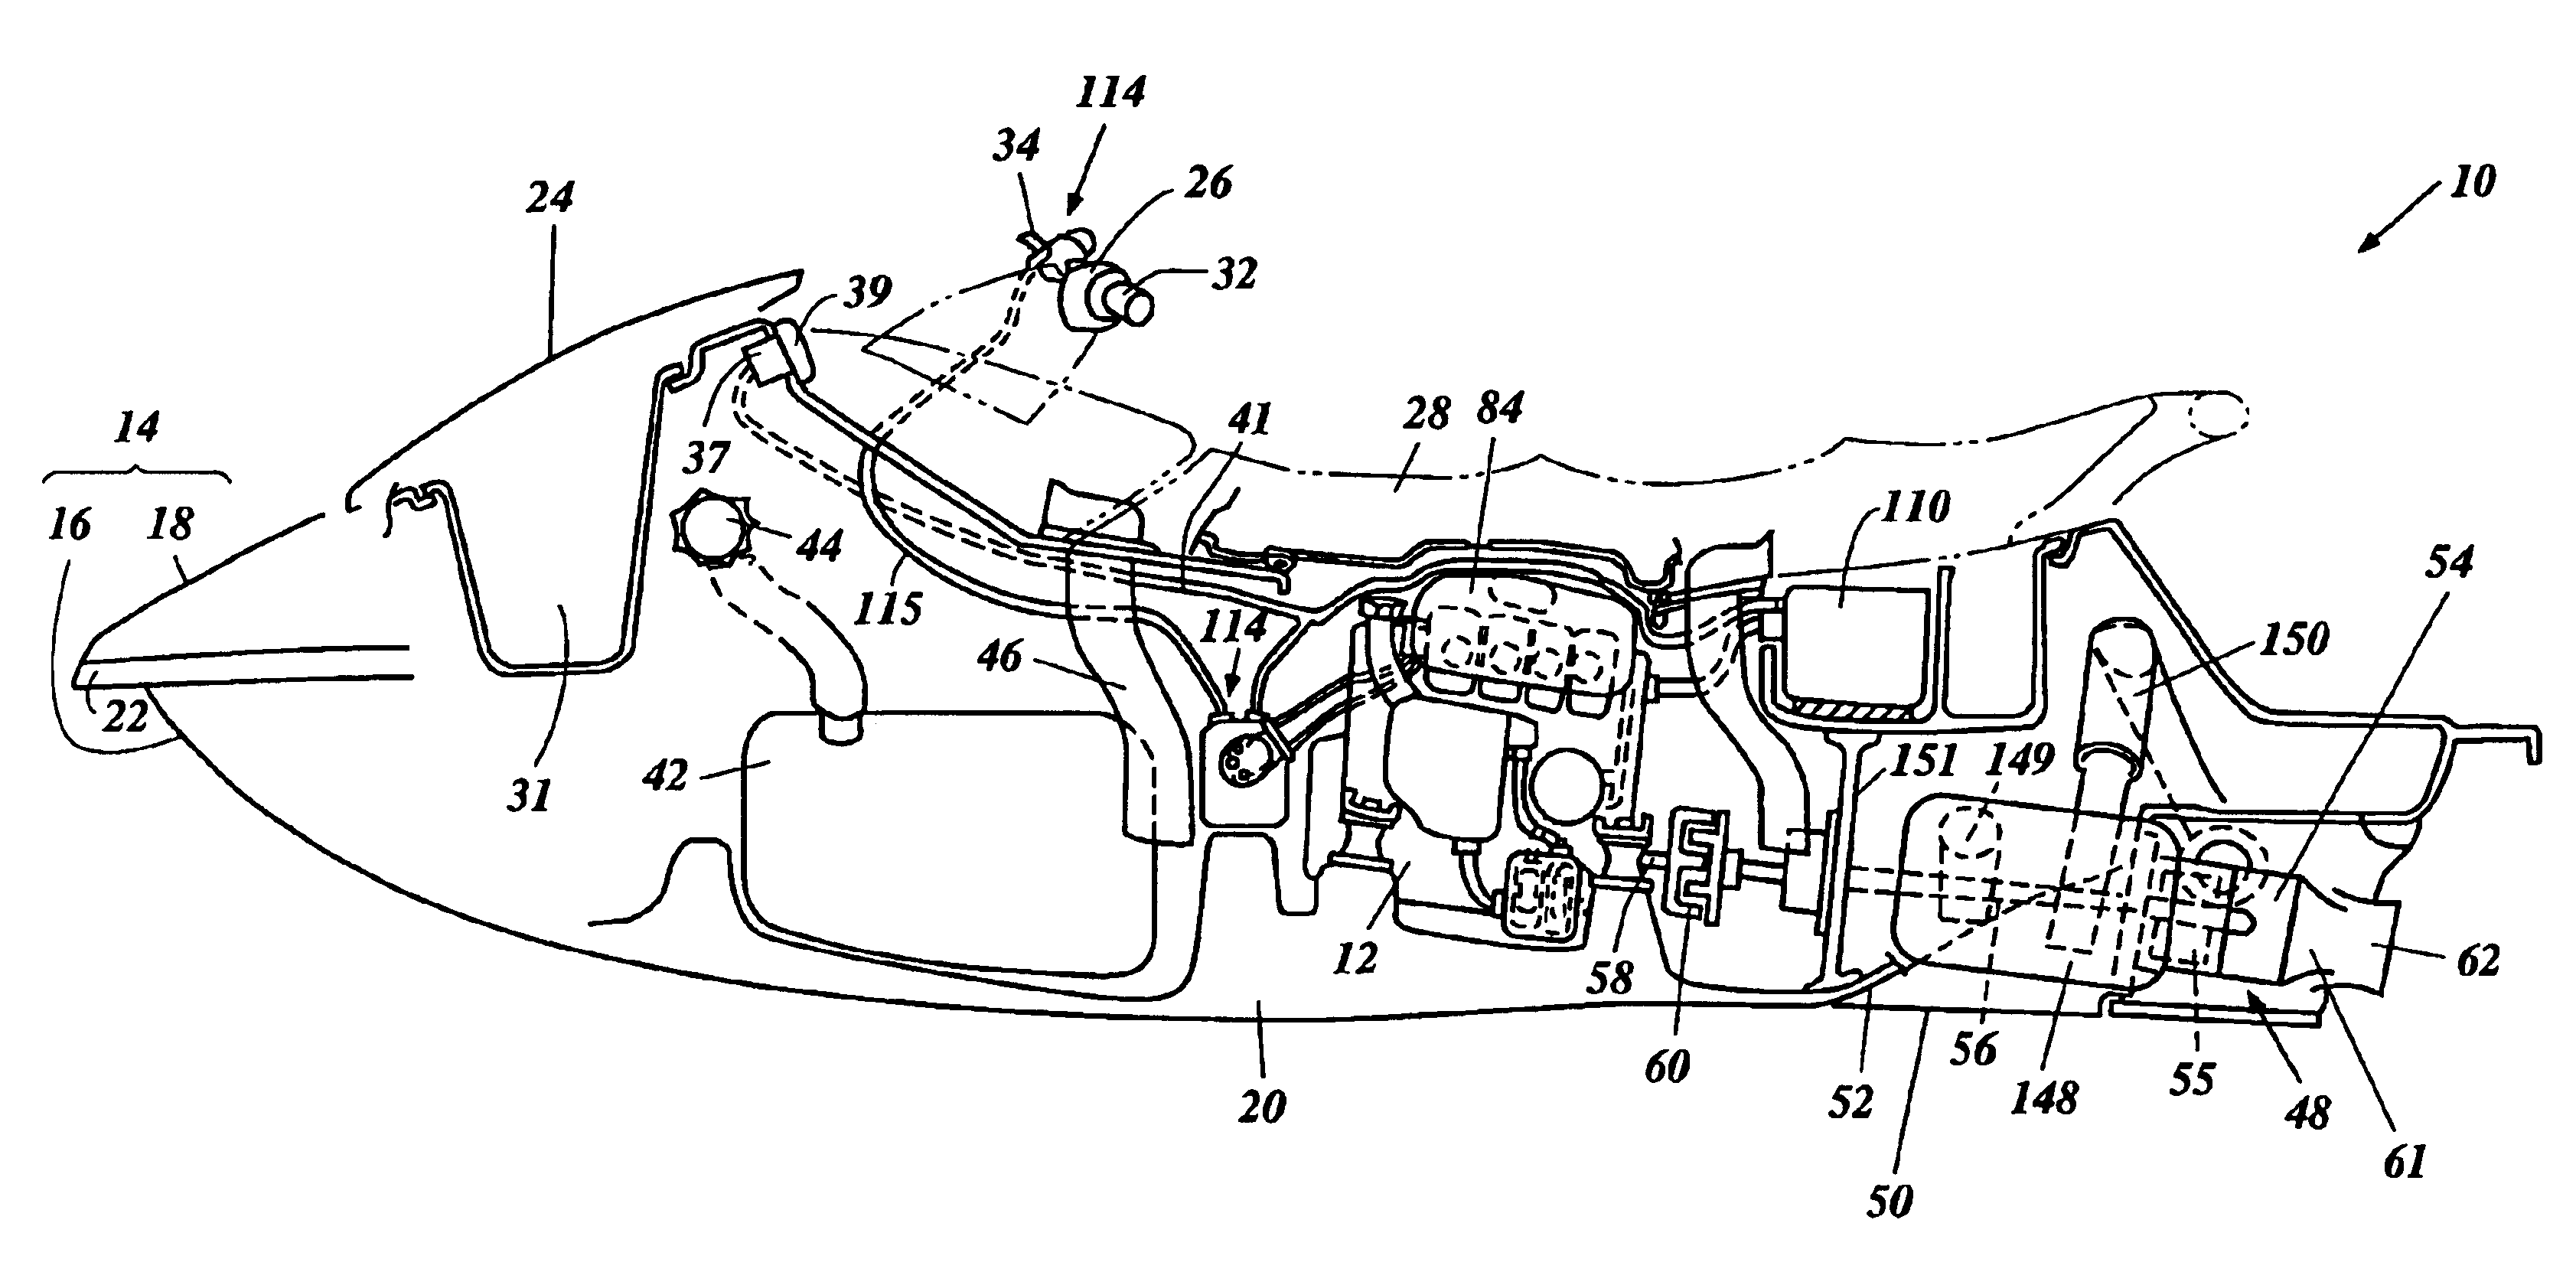 Electronic throttle control for watercraft